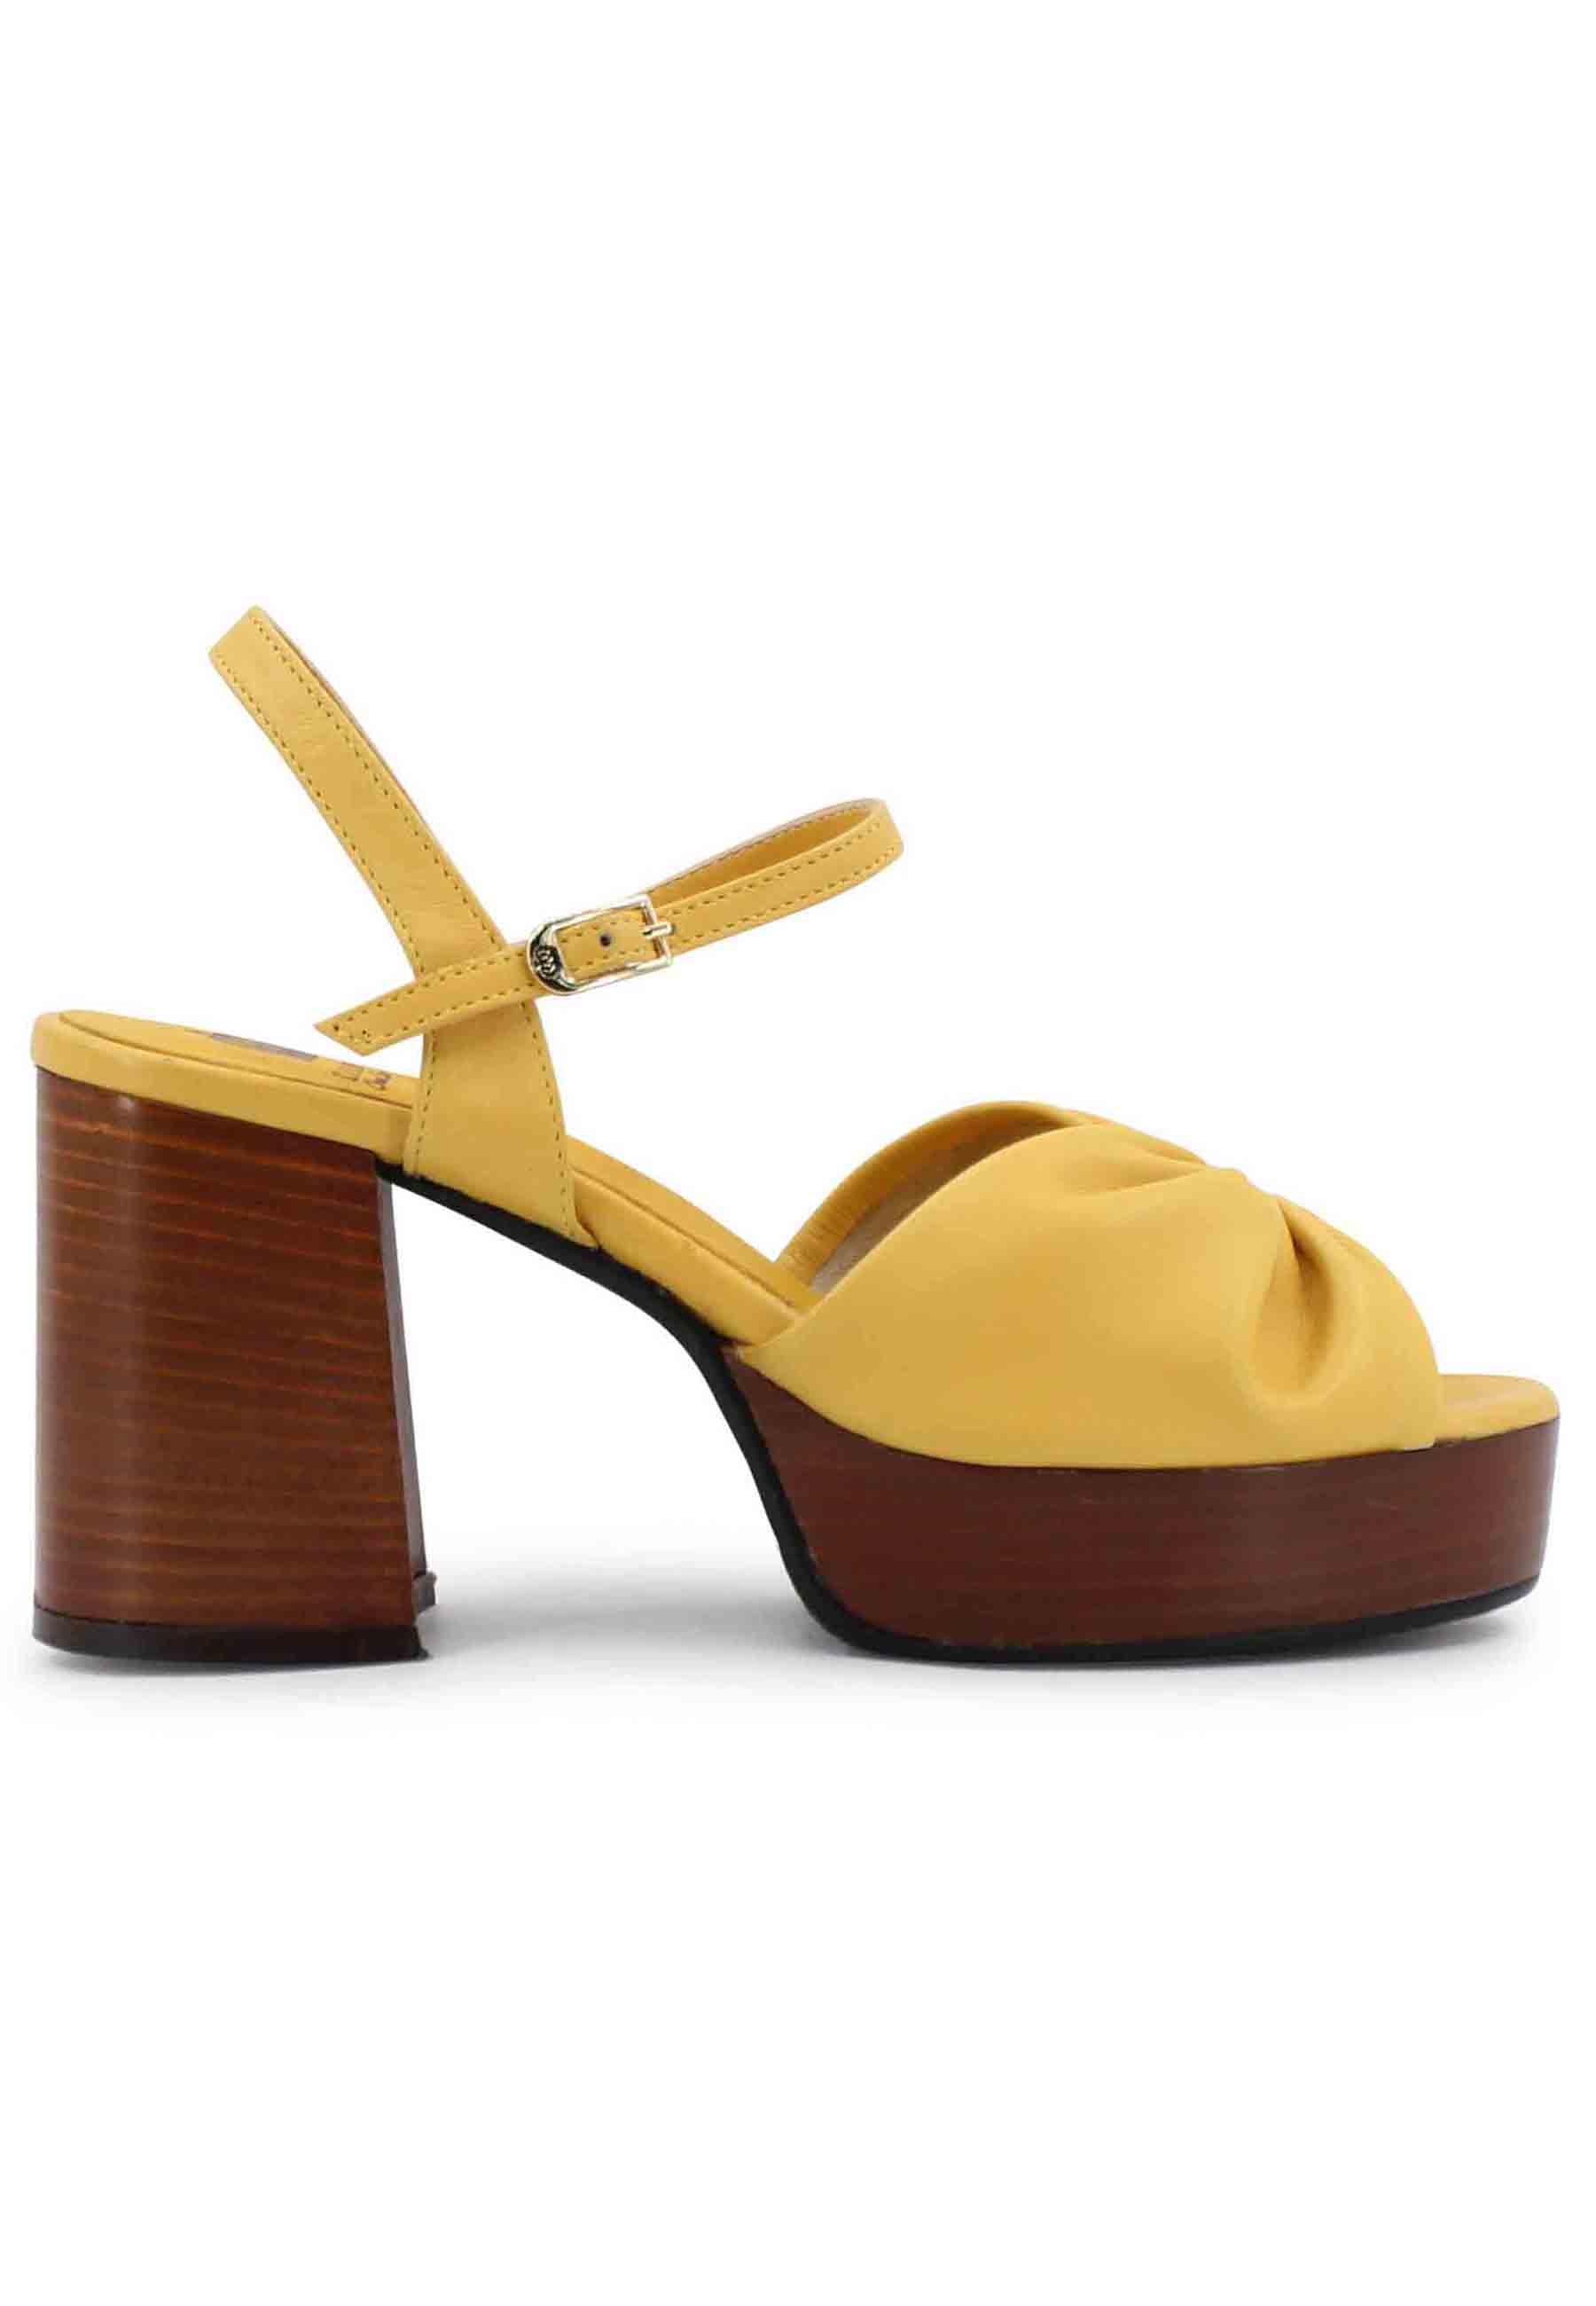 Women's yellow leather sandals with leather heel and platform